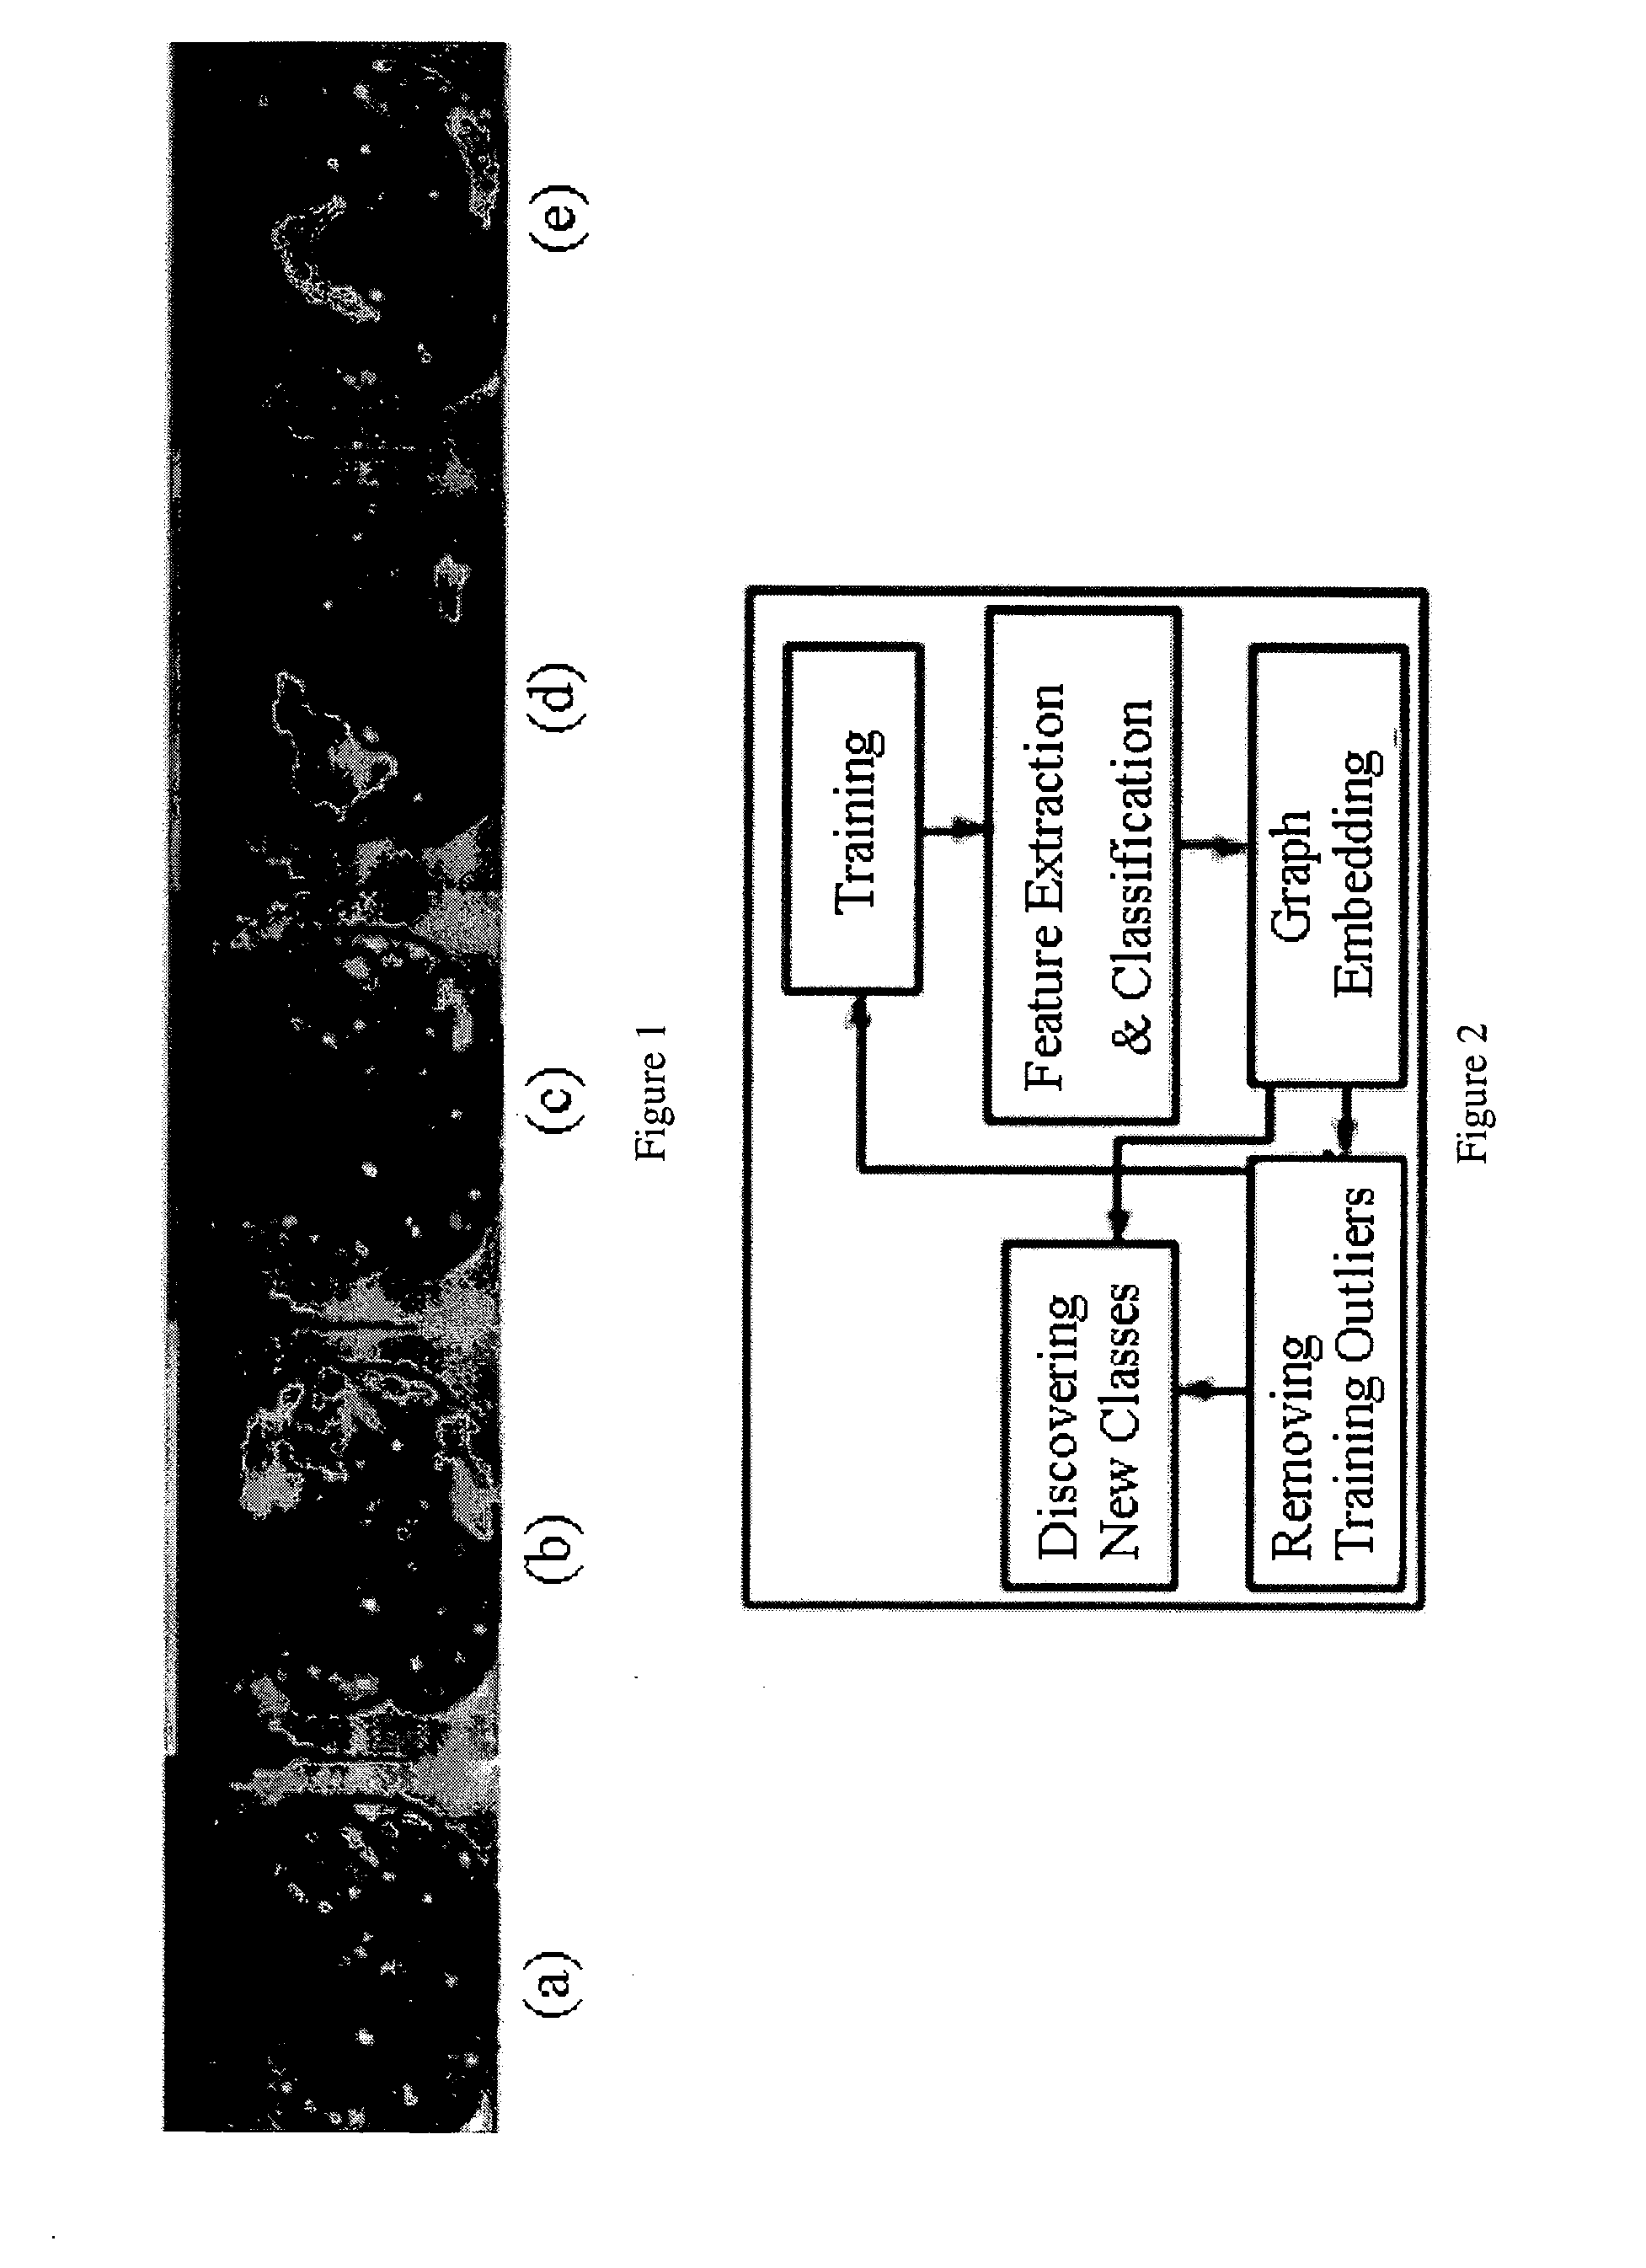 Systems and methods for classification of biological datasets